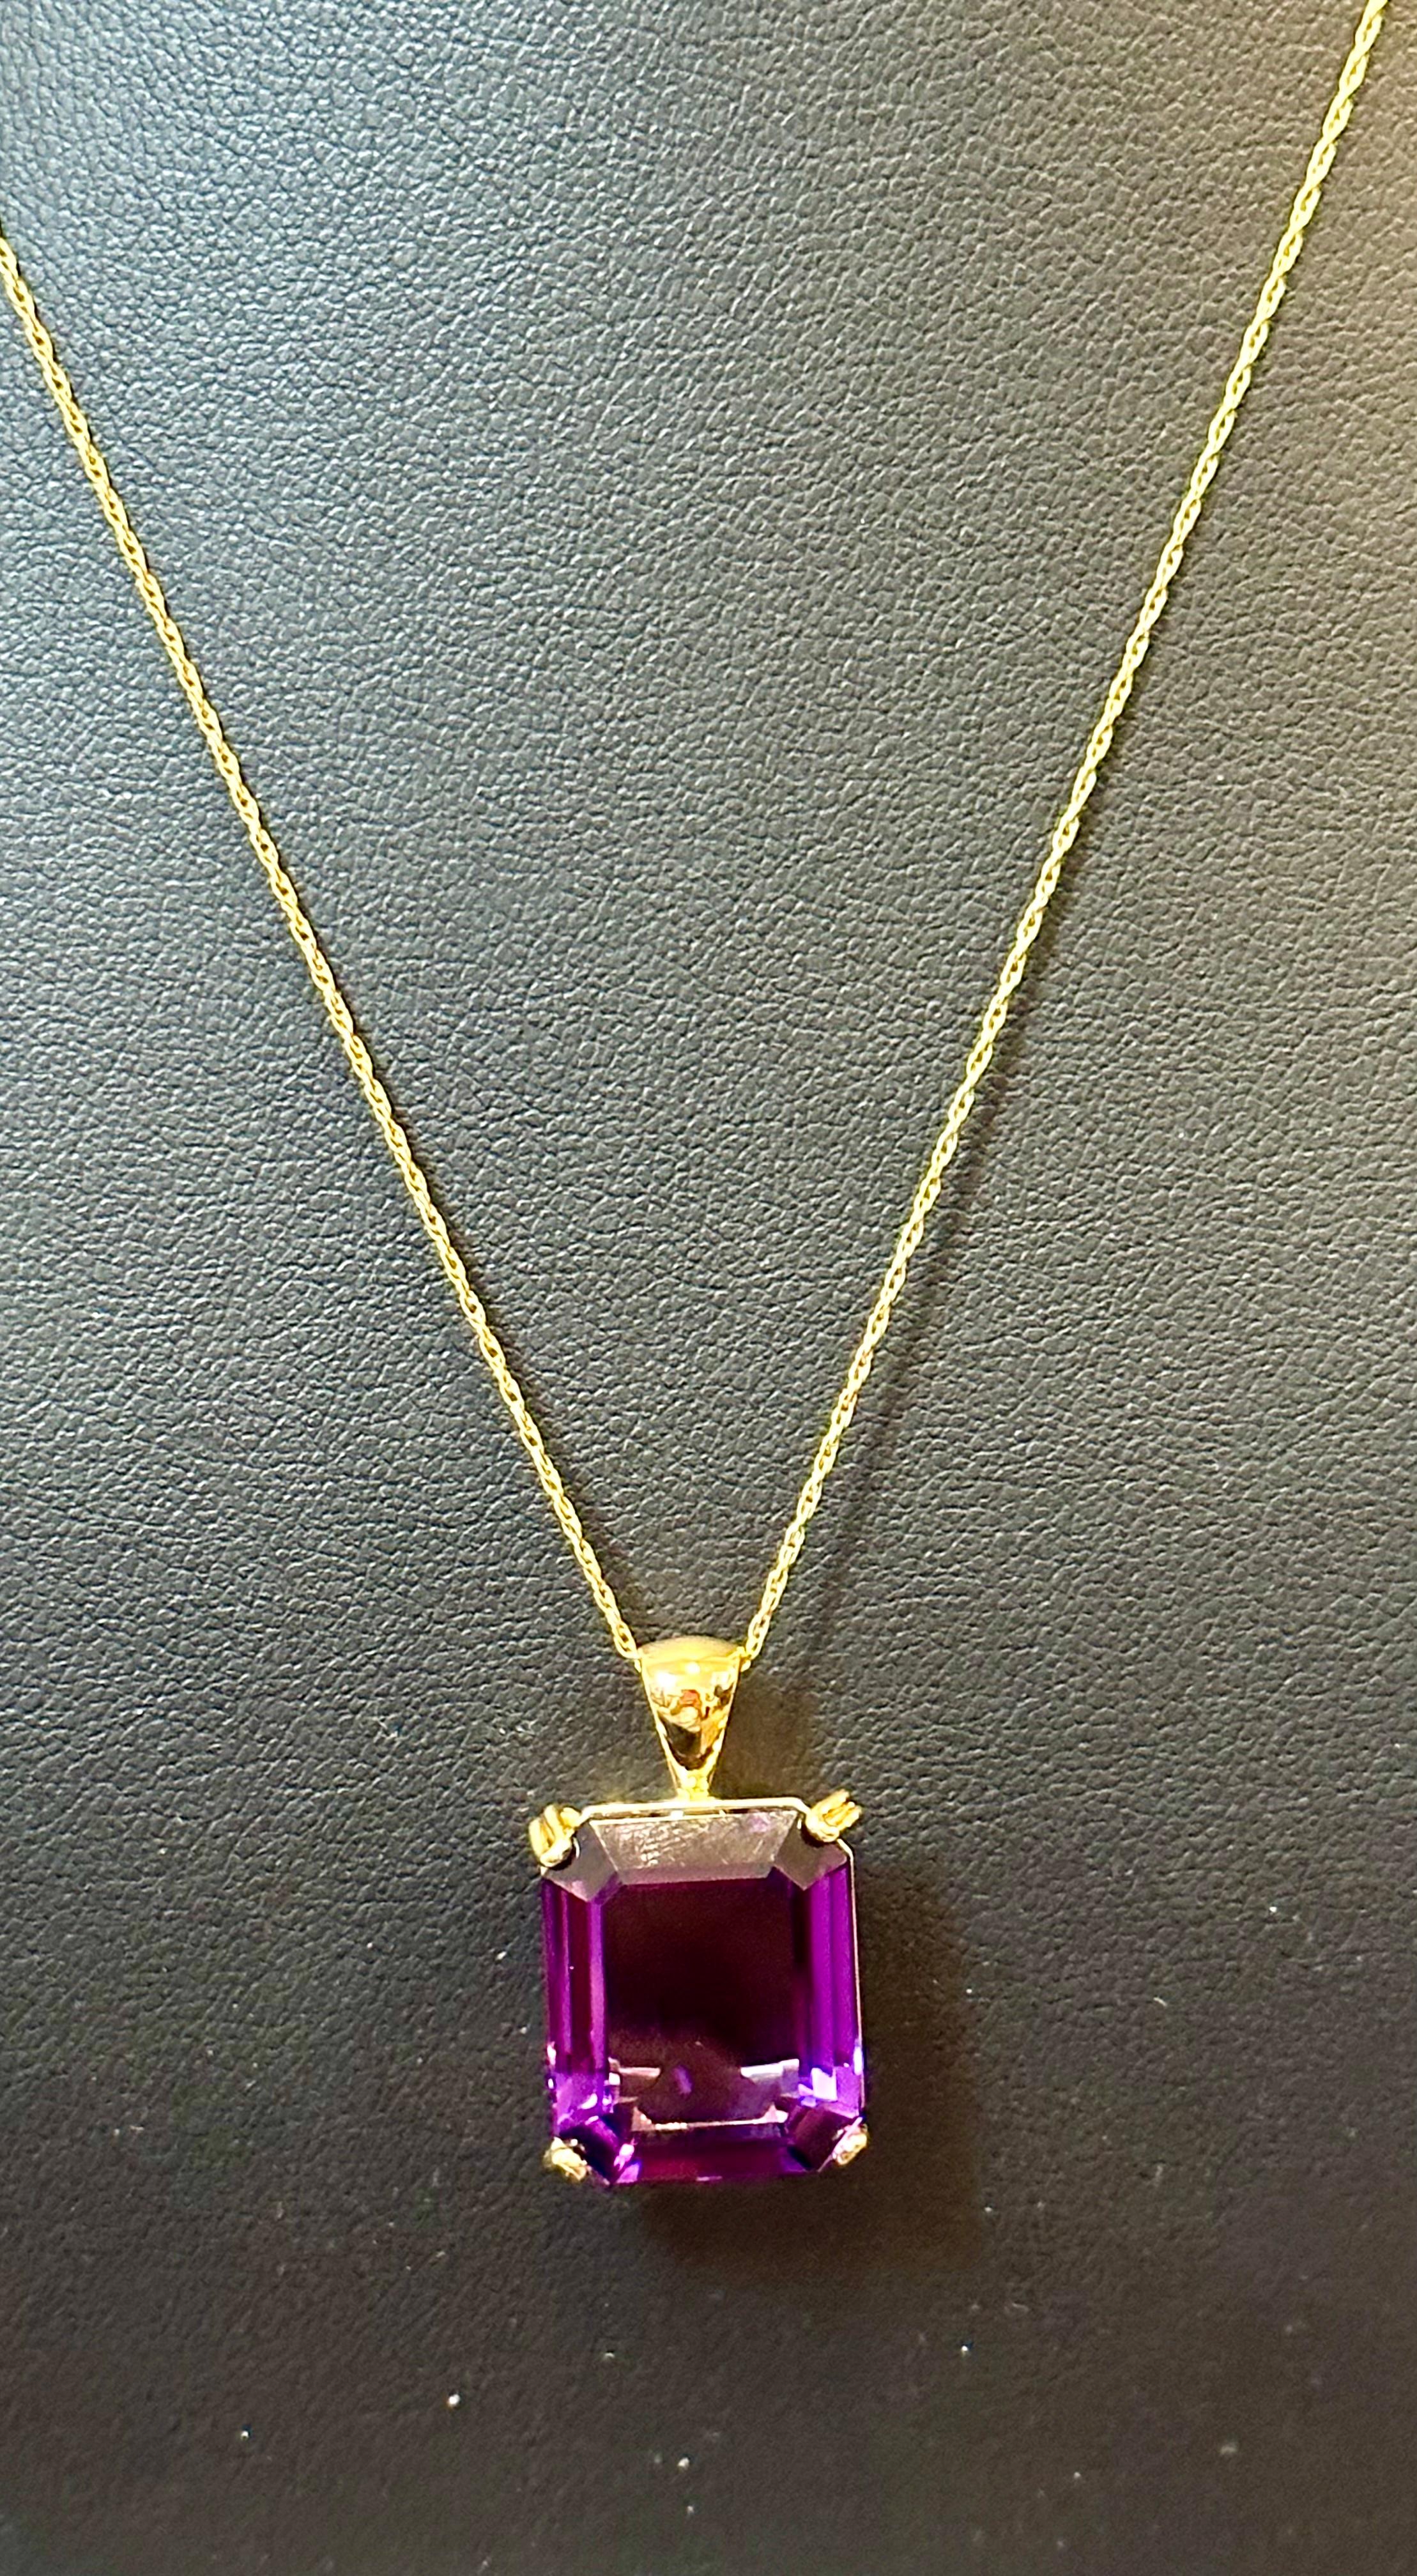 14 Ct Emerald Cut Amethyst Pendant/Neck 18Kt  Gold + 14 Kt Yellow Gold Chain For Sale 9